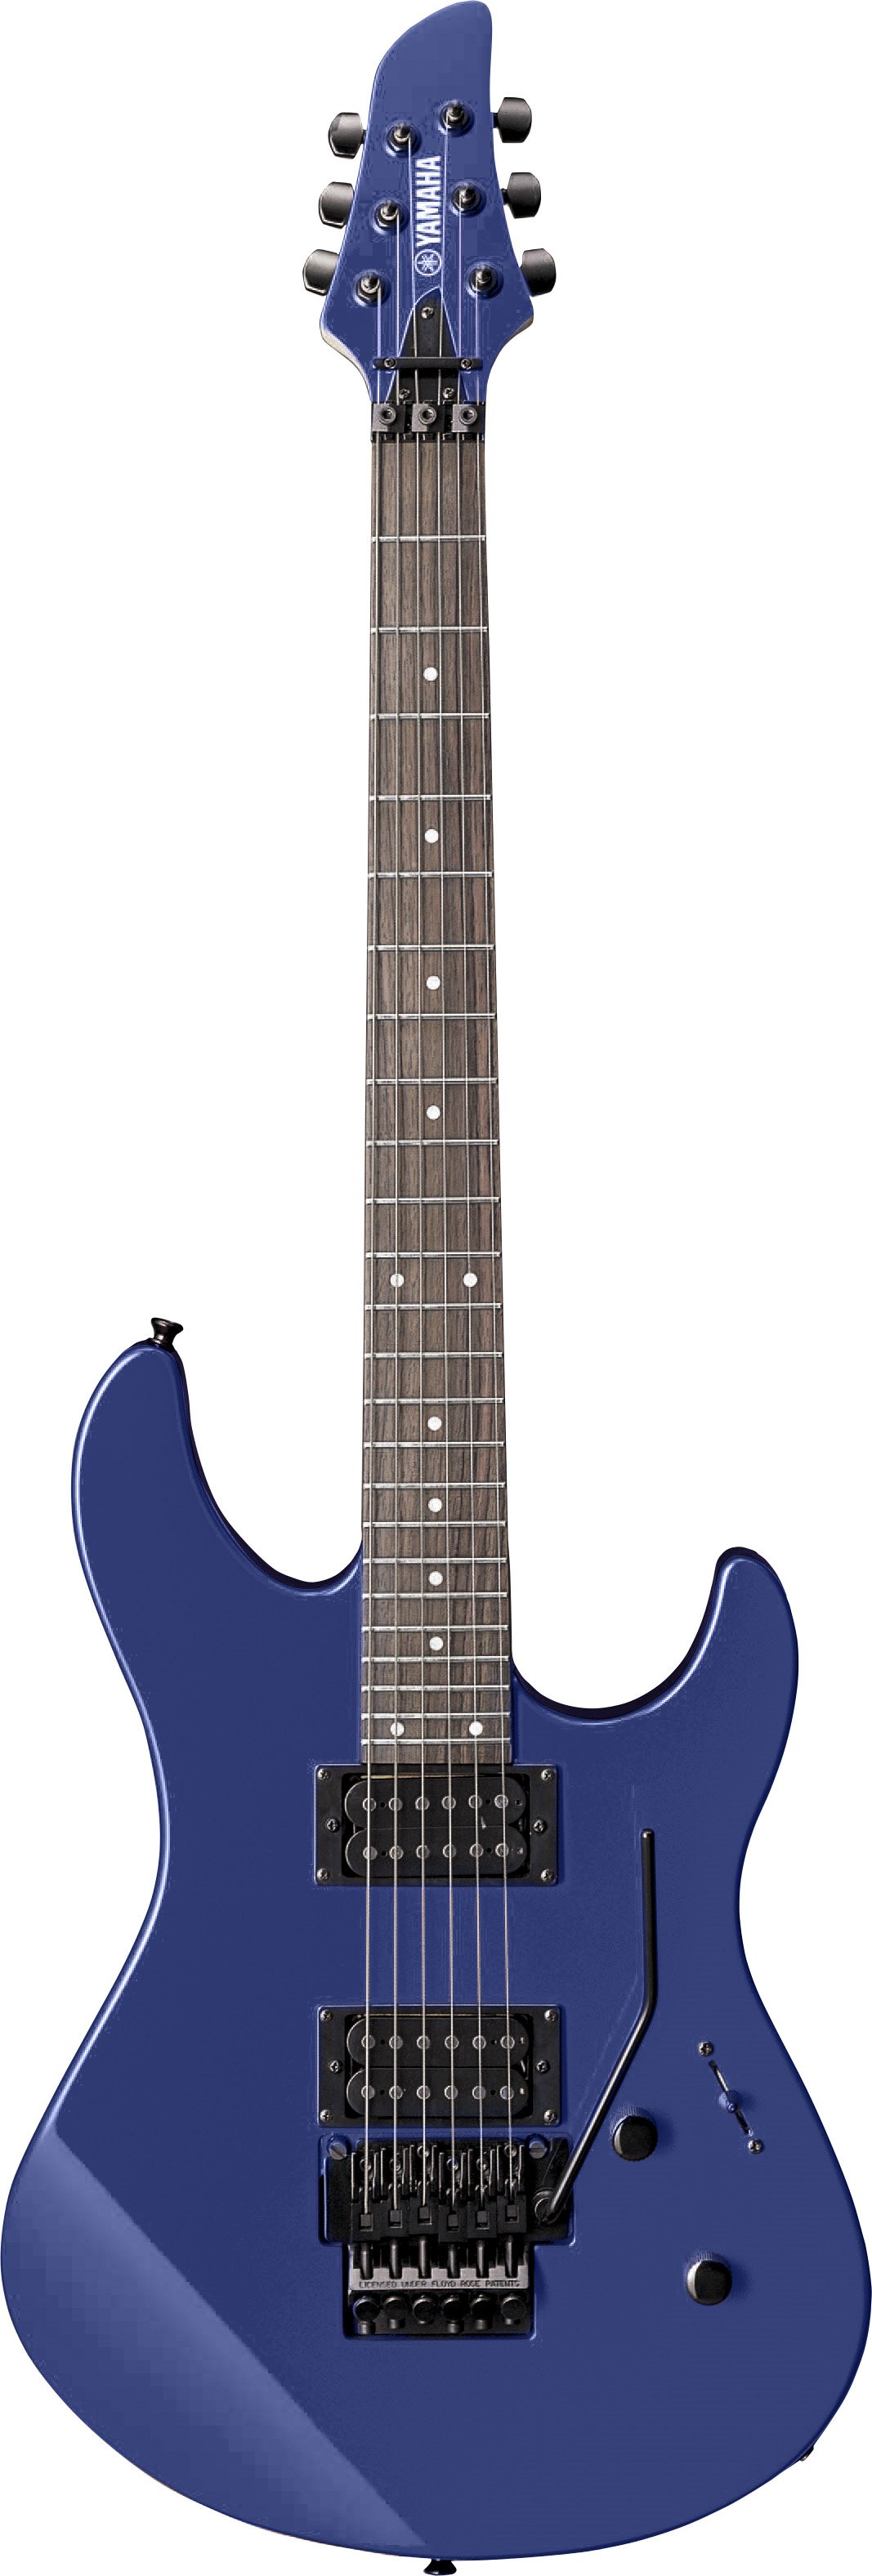 RGX - Overview - Electric Guitars - Guitars, Basses, & Amps 